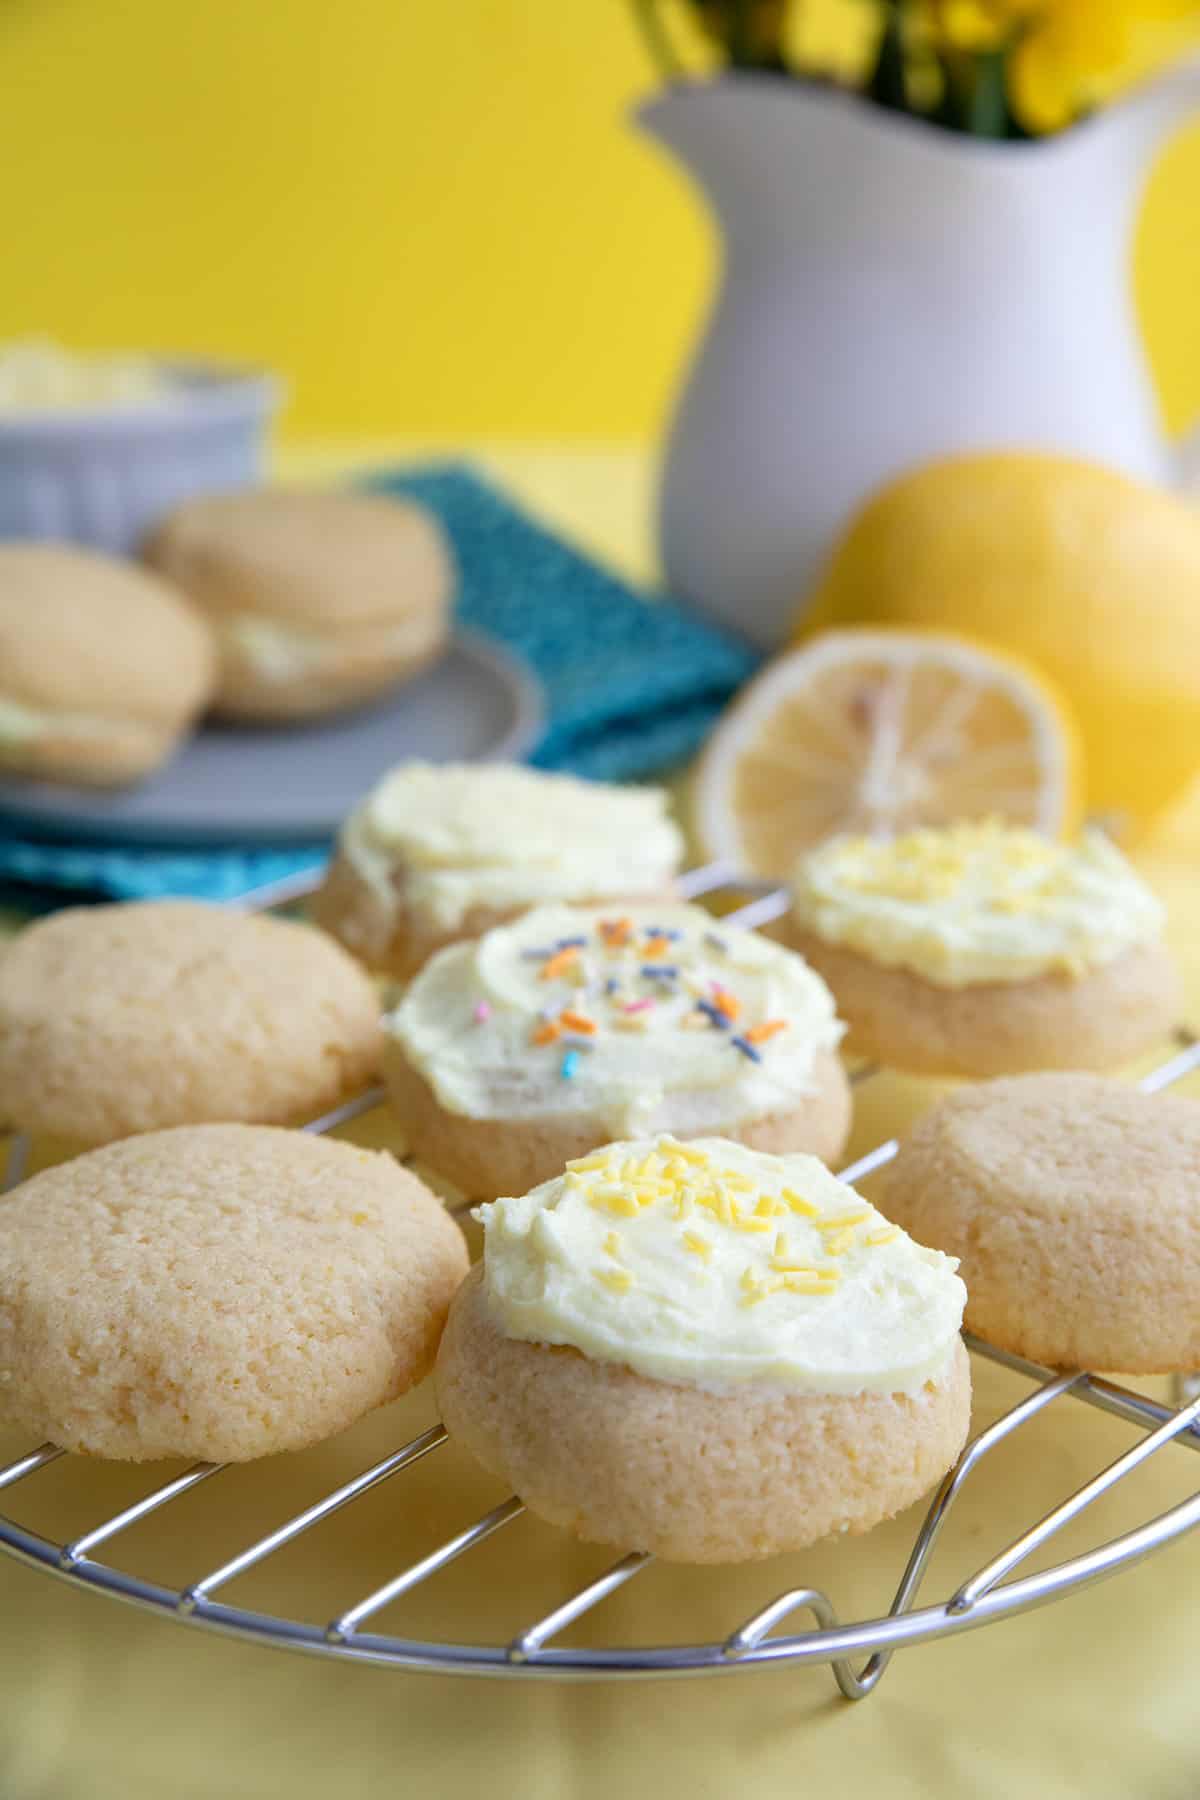 Frosted Lemon Keto Cookies on a wire rack in front of lemons and a vase of yellow flowers.